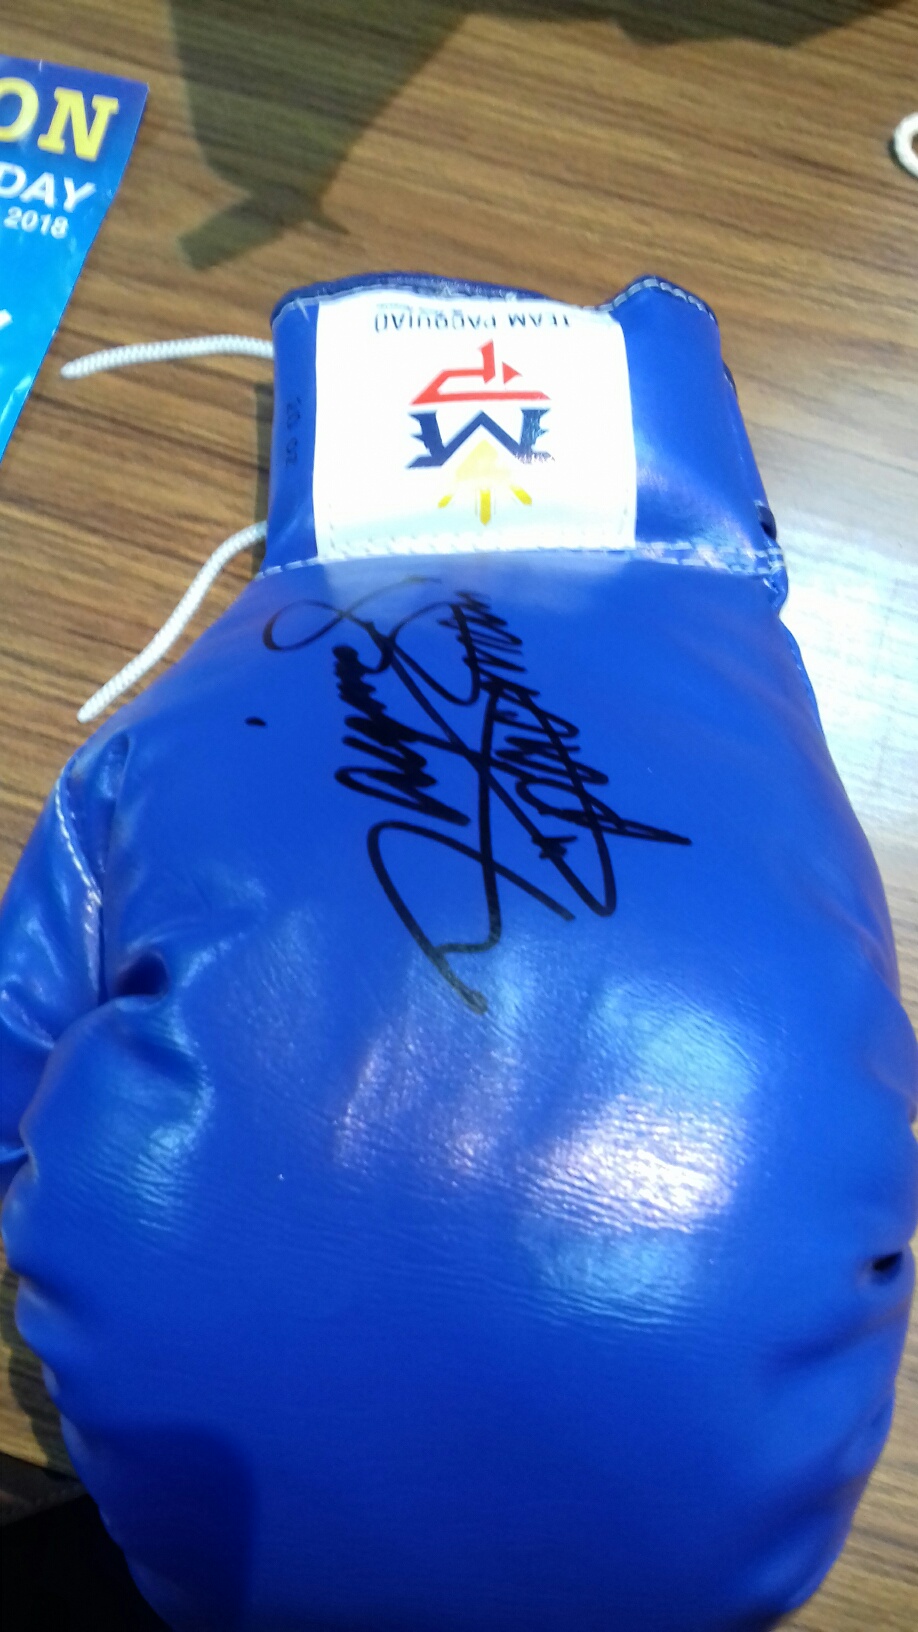 Manny Pacquiao Signed Glove